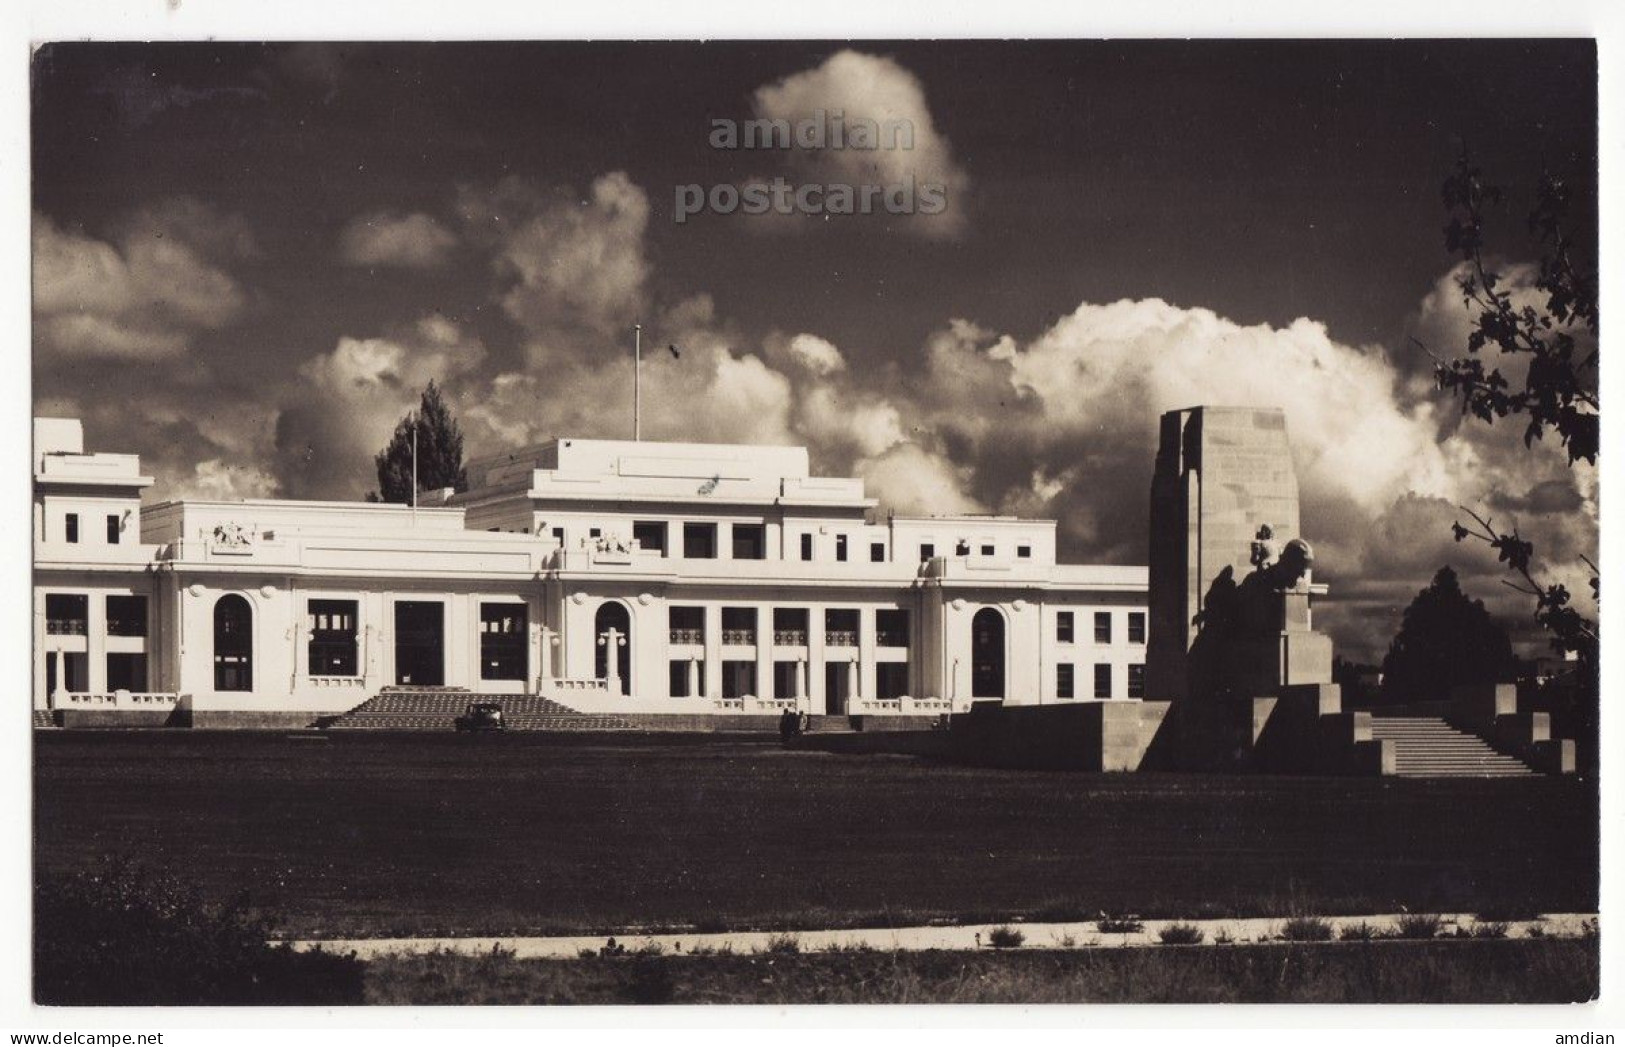 AUSTRALIA Canberra Houses Of Parliament Building, C1940s Strangman RPPC Vintage Real Photo Postcard - Canberra (ACT)